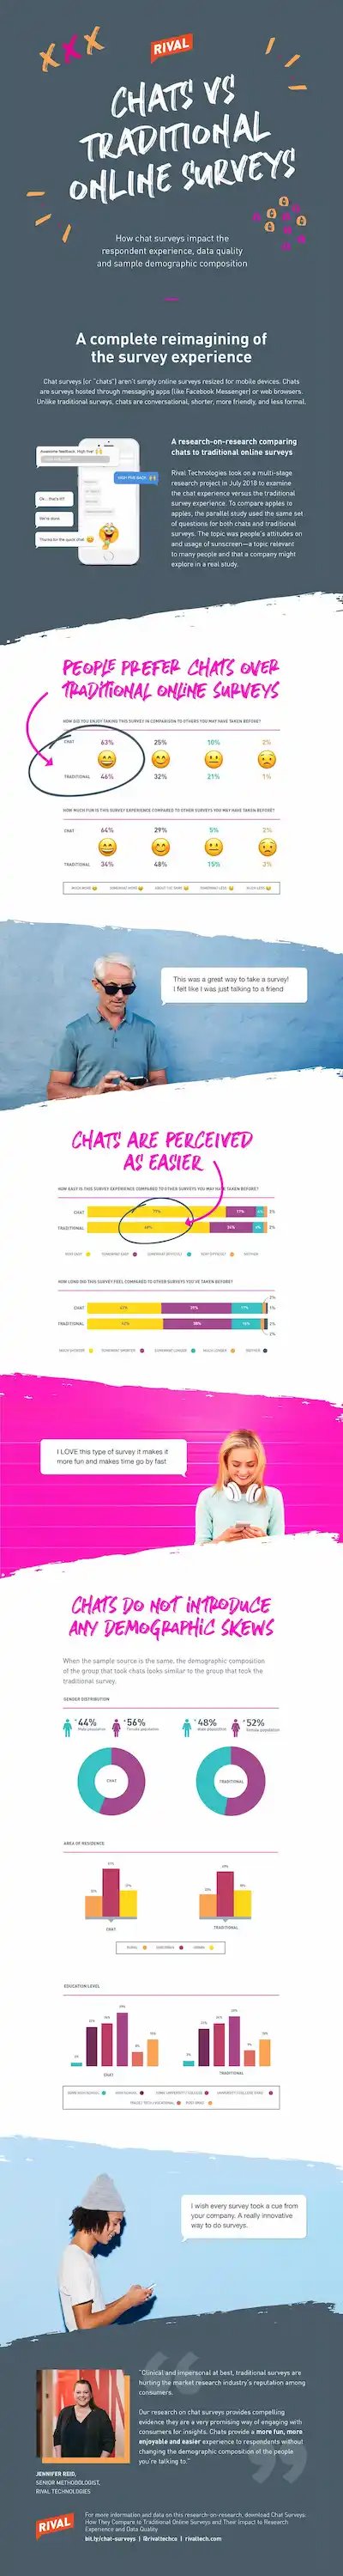 Rival_Infographic_Chats_vs_Traditional_Online_Surveys (2)